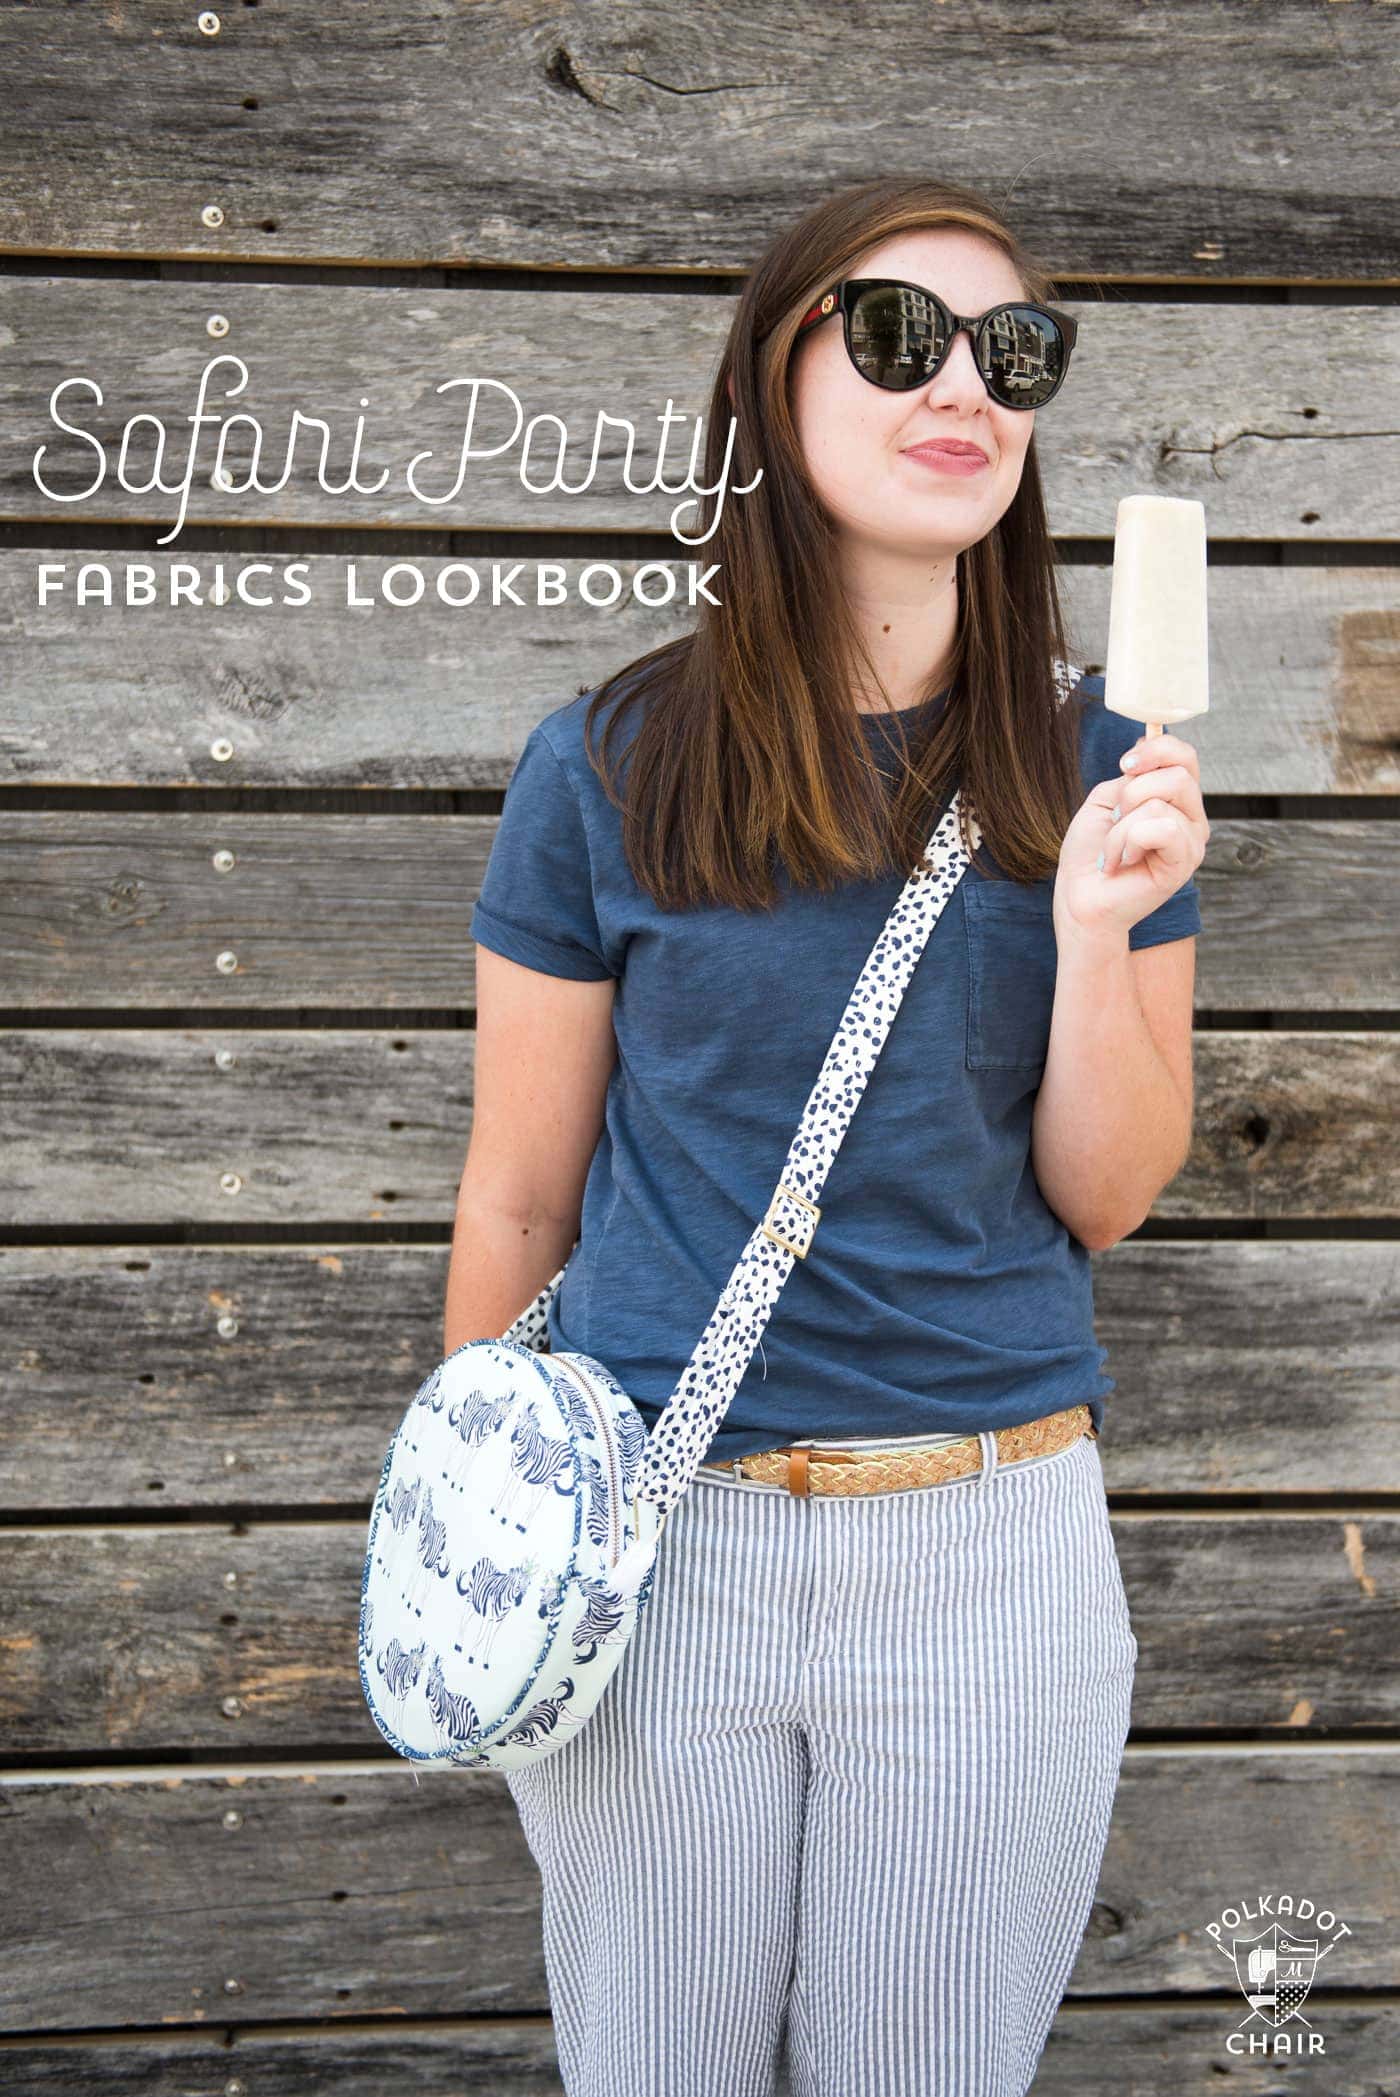 Introducing the Safari Party Fabric Line and Look Book!